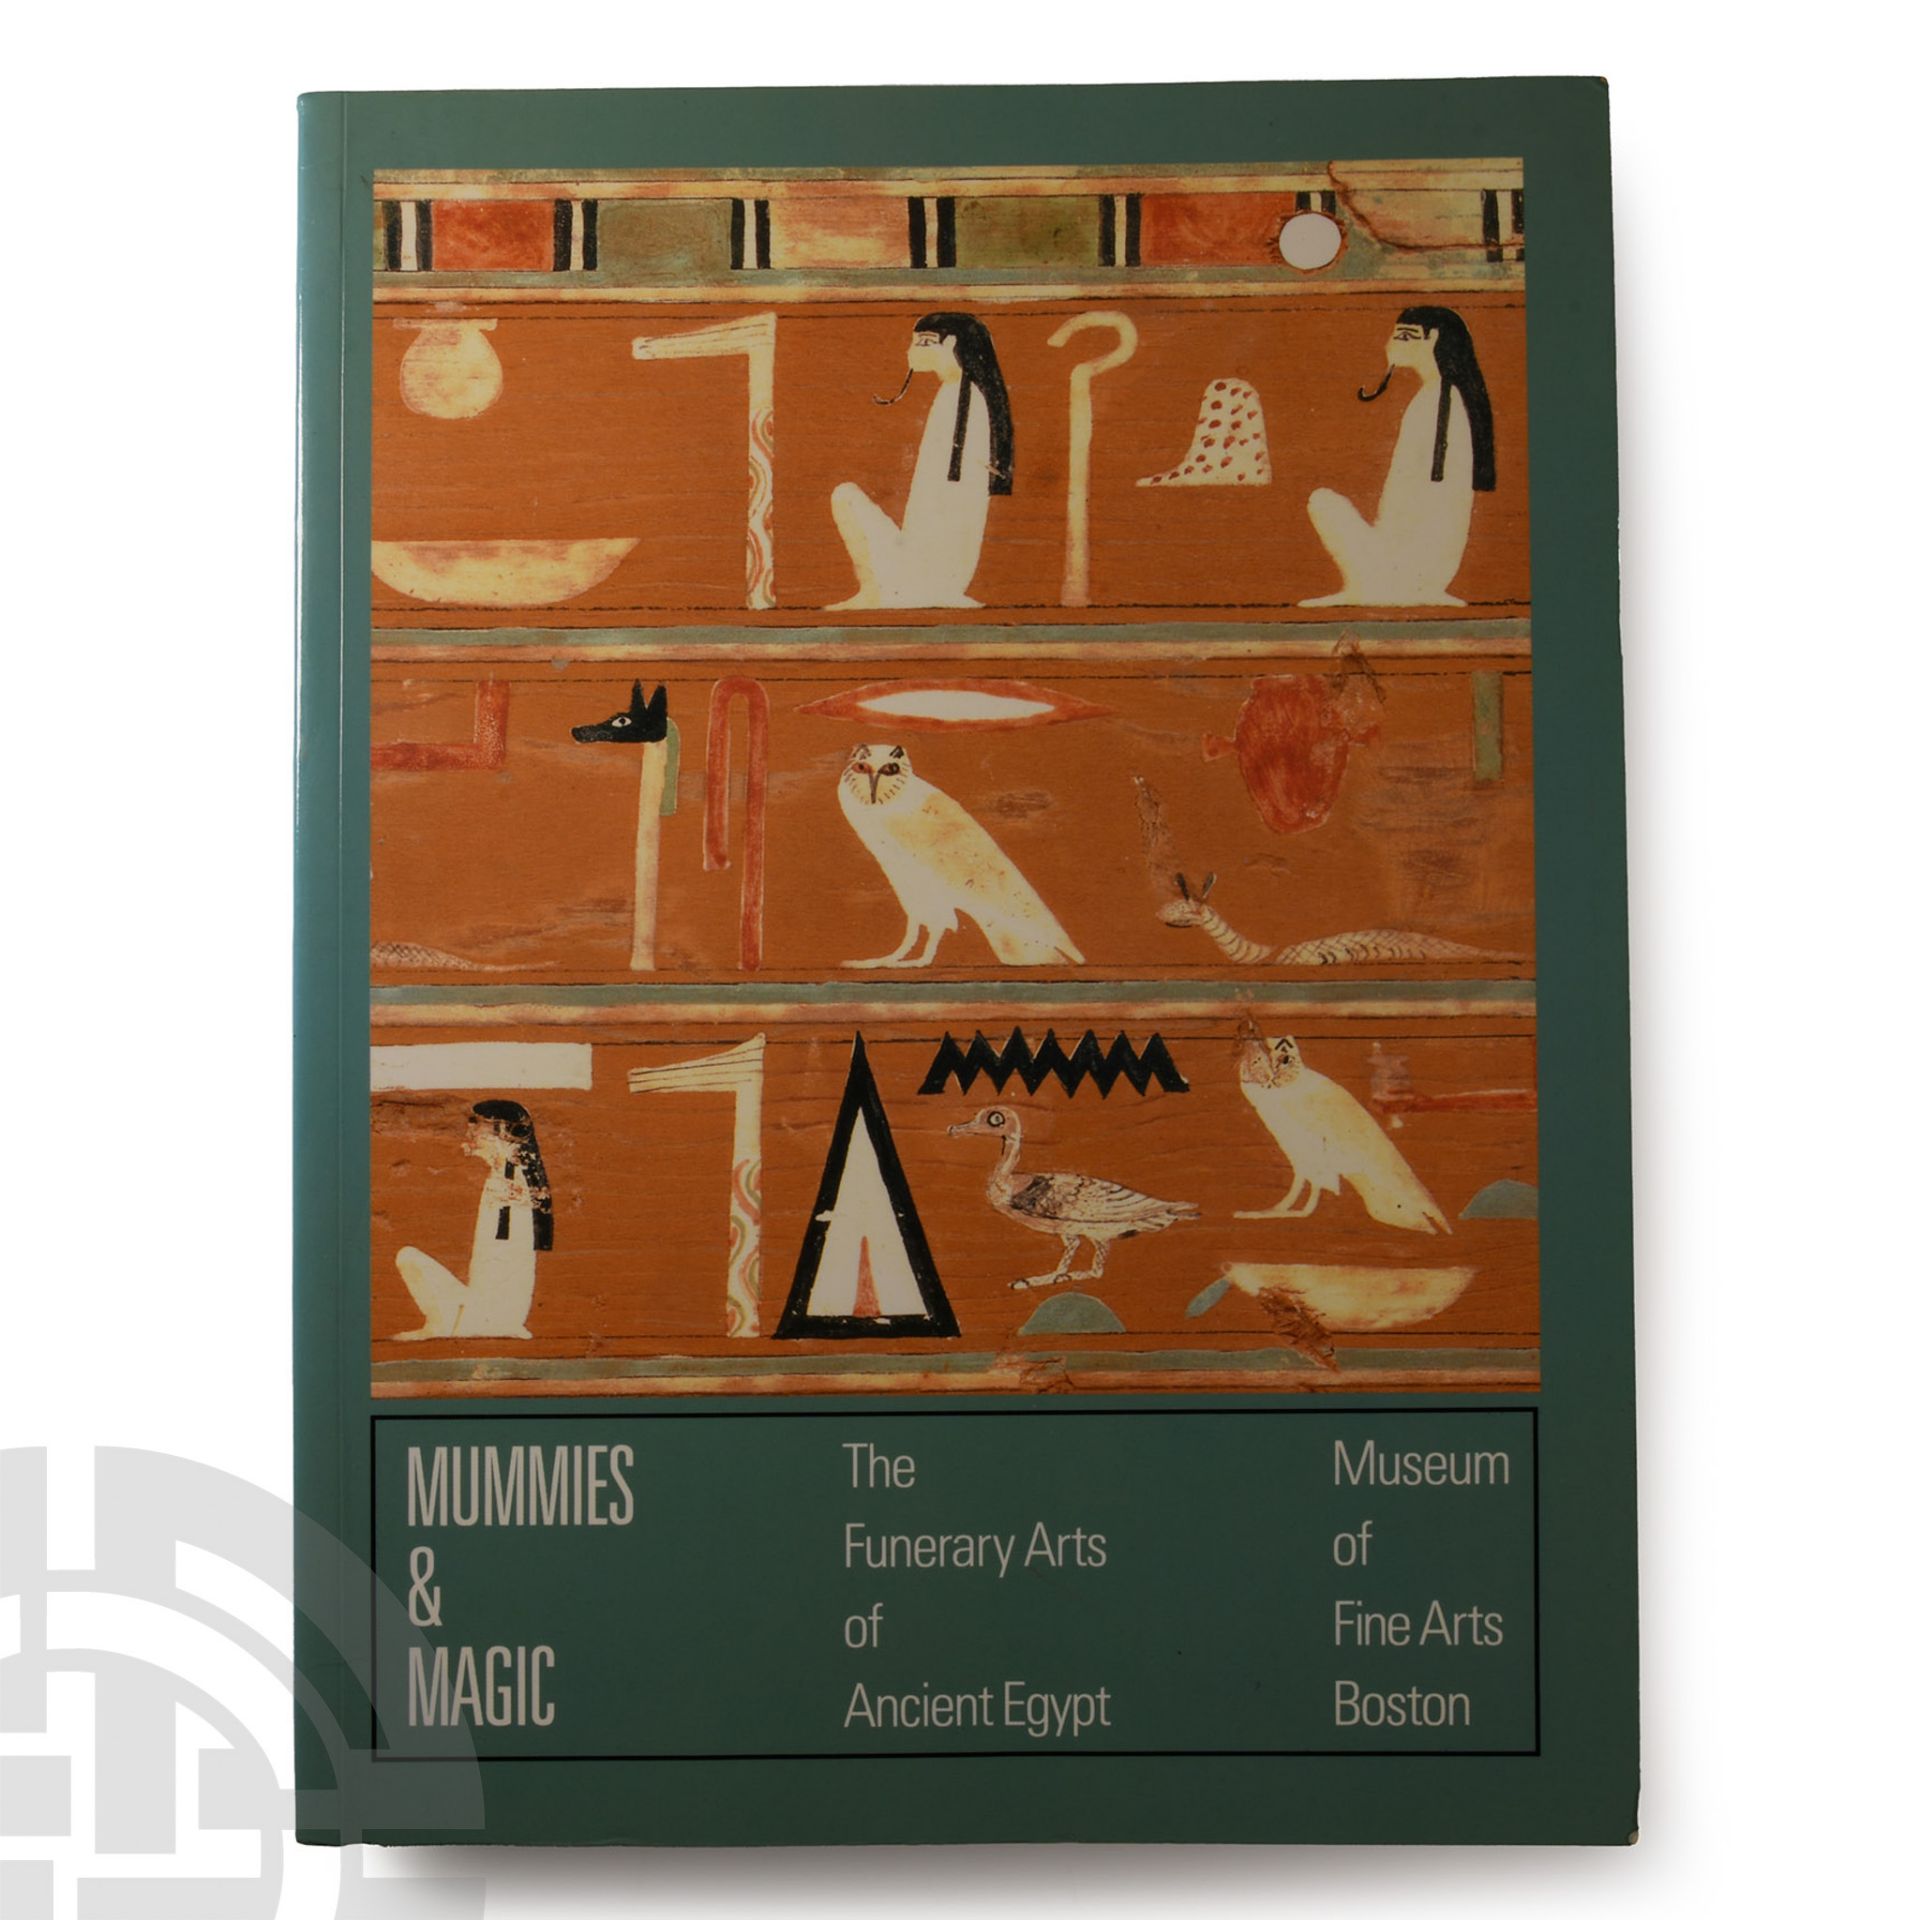 Archaeological Books - Mummies & Magic: The Funerary Arts of Ancient Egypt